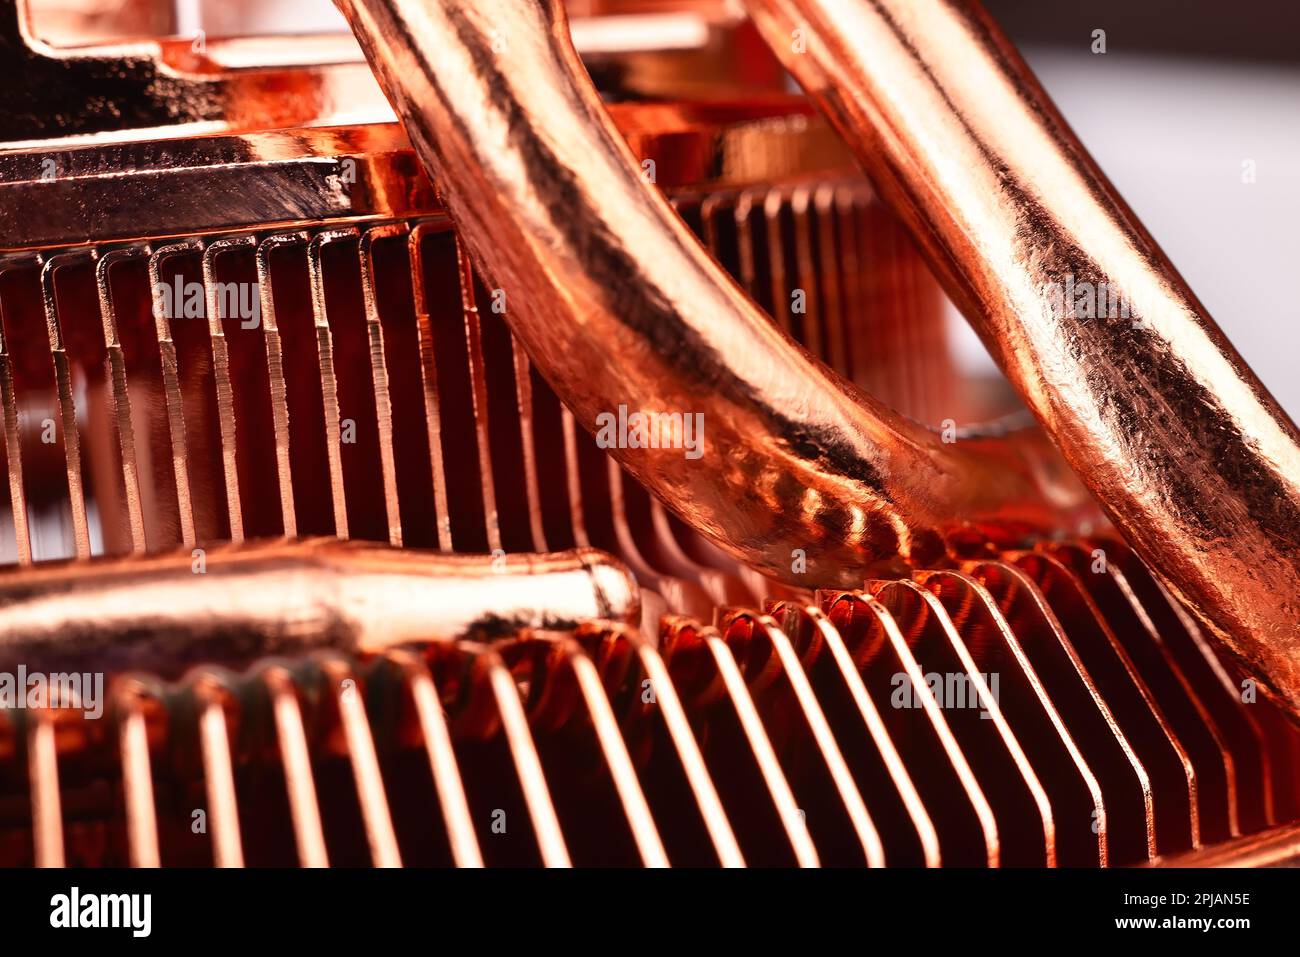 Air cooling system for the CPU. Copper cpu cooler. Stock Photo